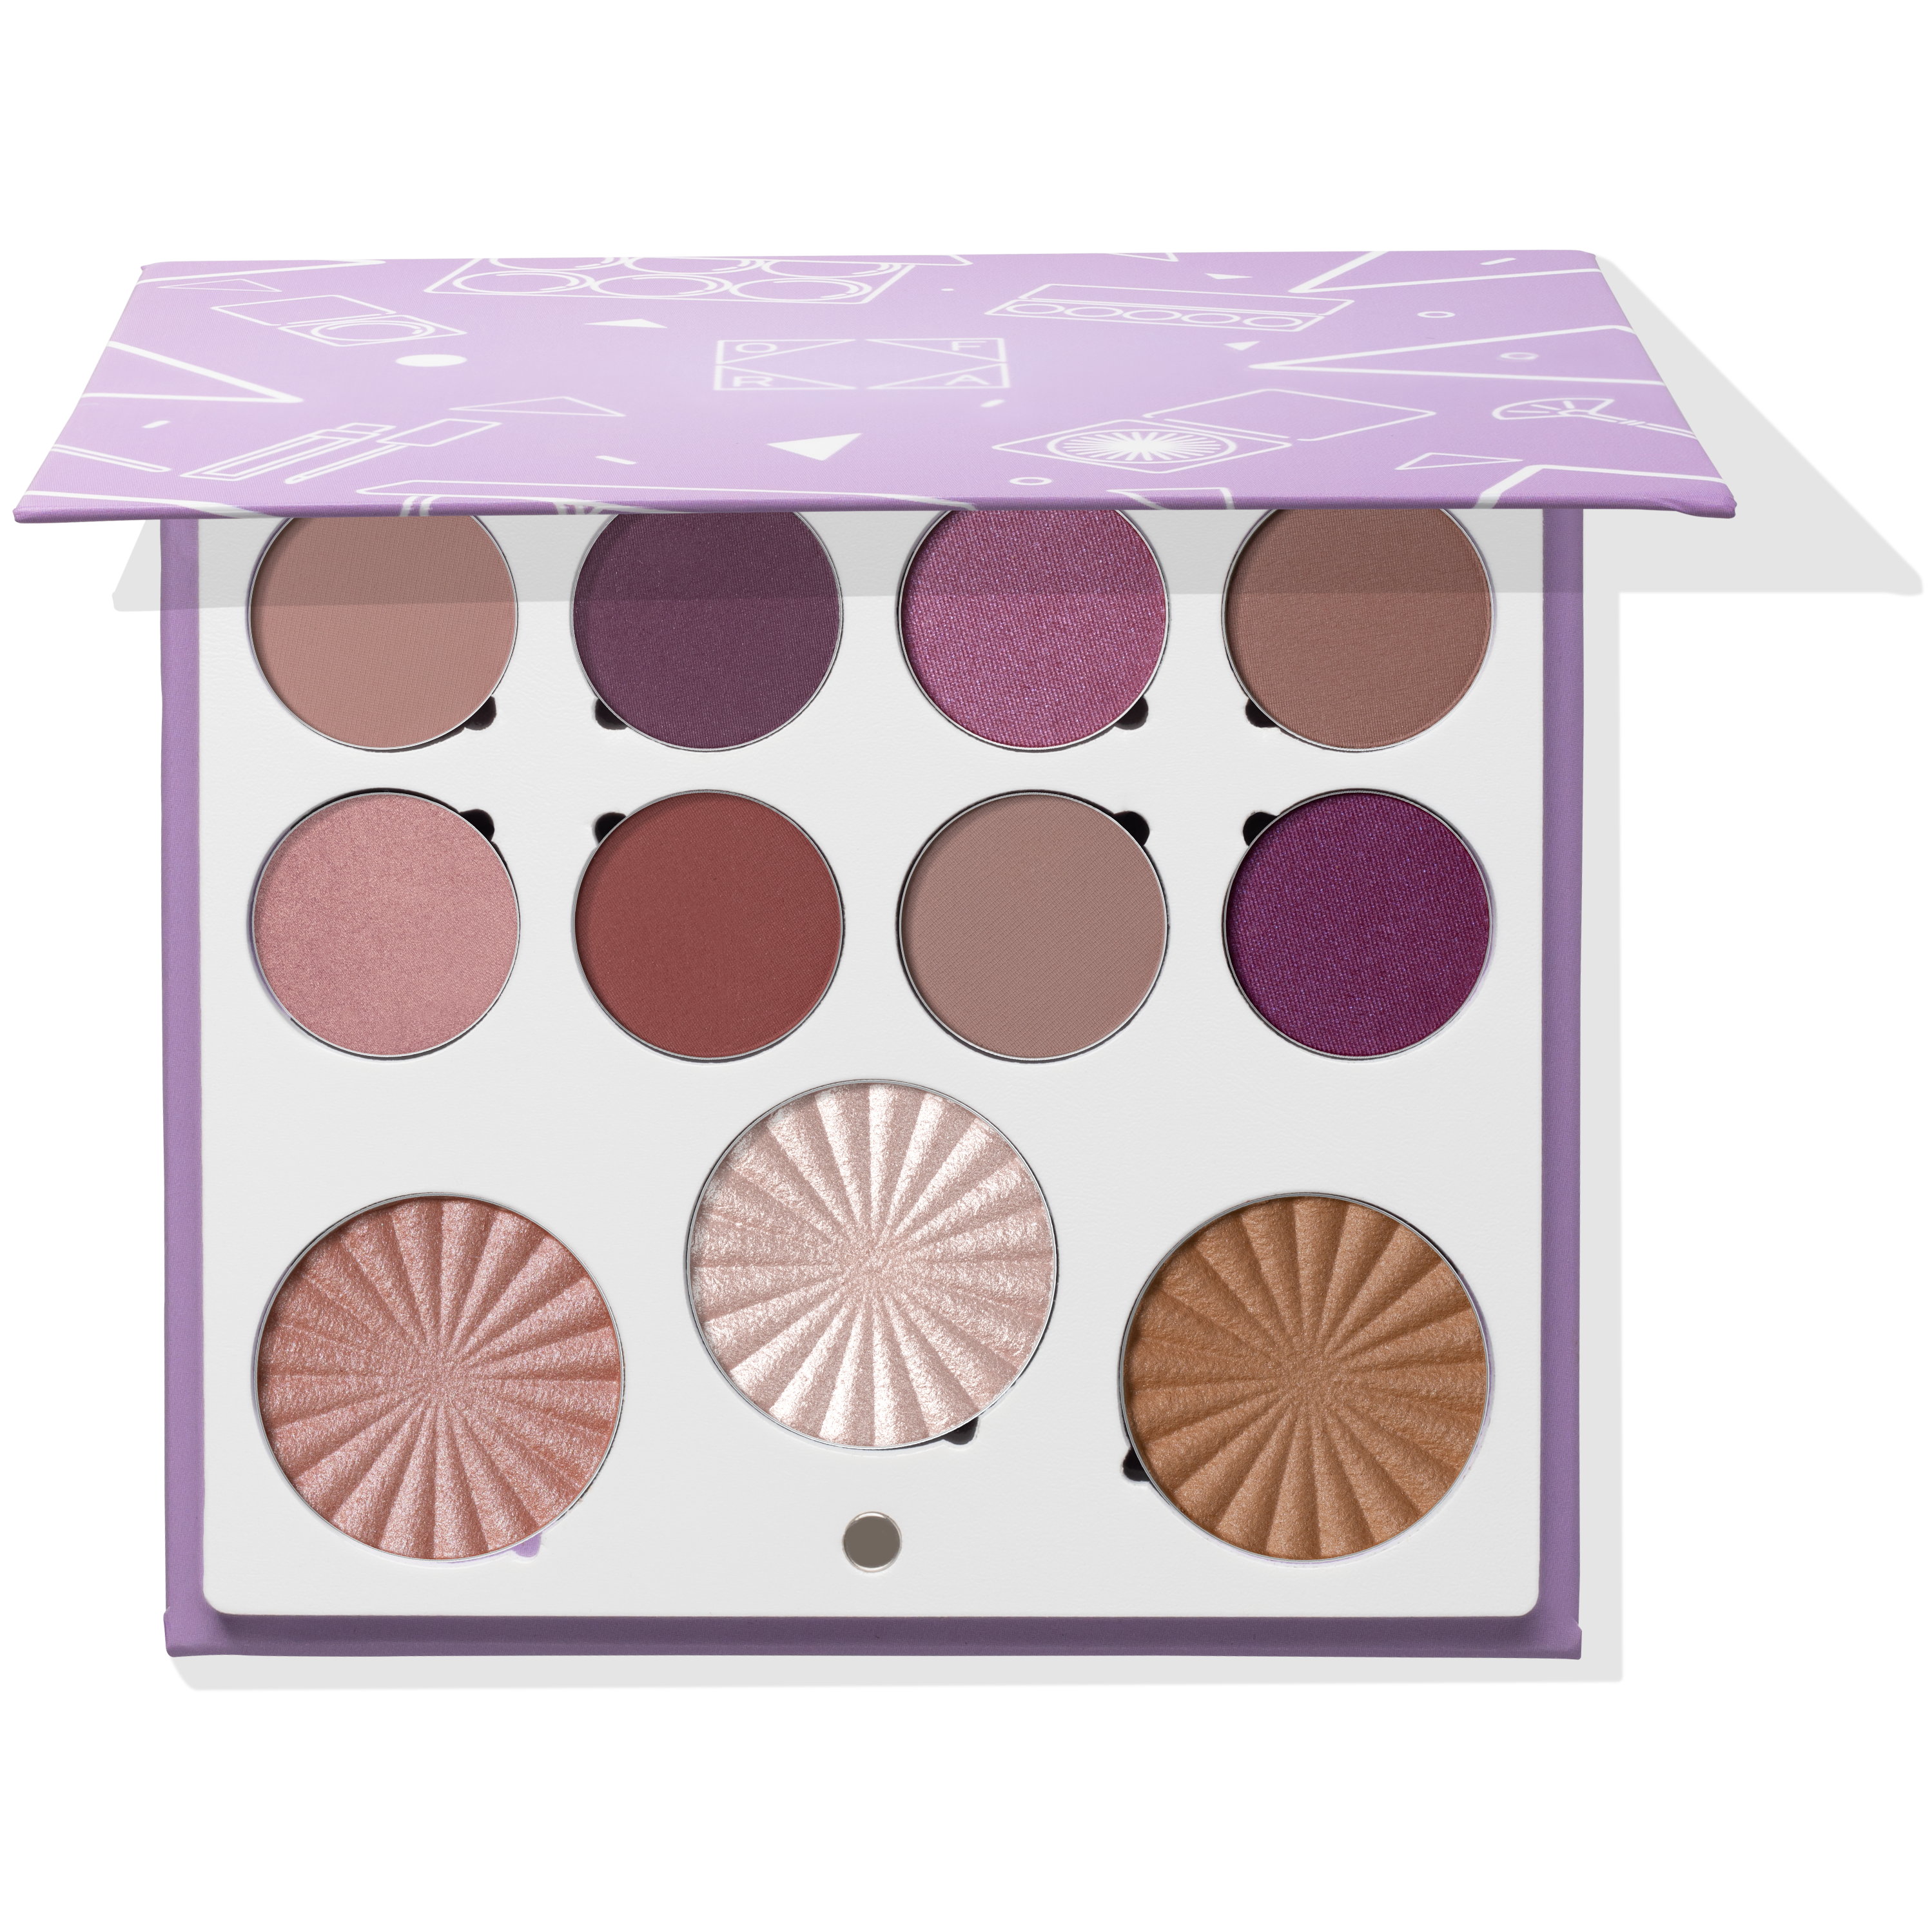 OFRA Cosmetics OFRA x Samantha March Life’s a Draft Mini Palette